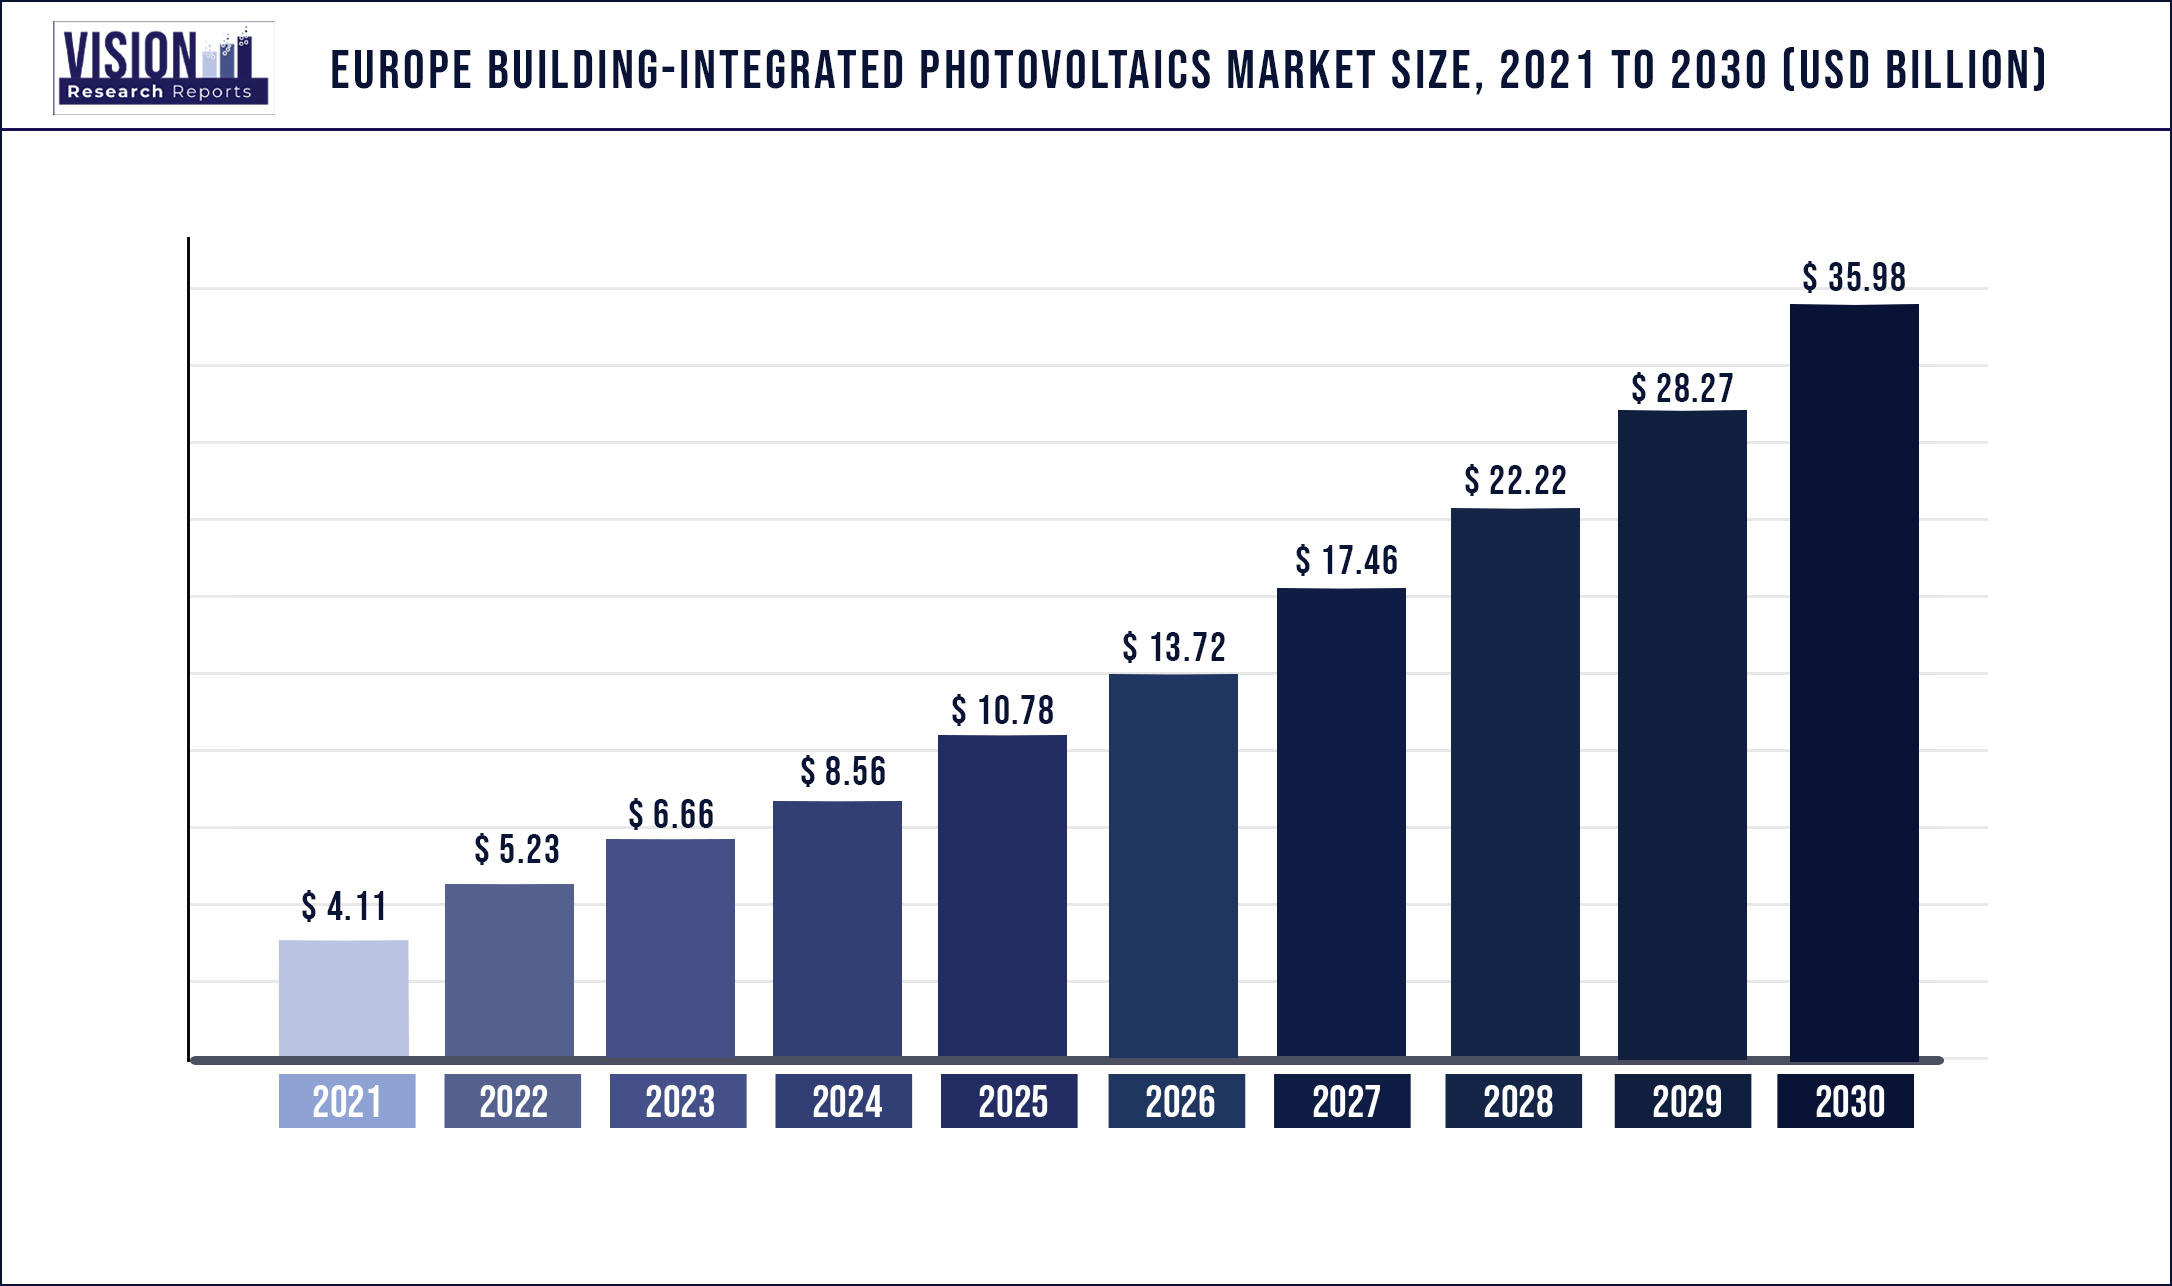 Europe Building-integrated Photovoltaics Market Size 2021 to 2030